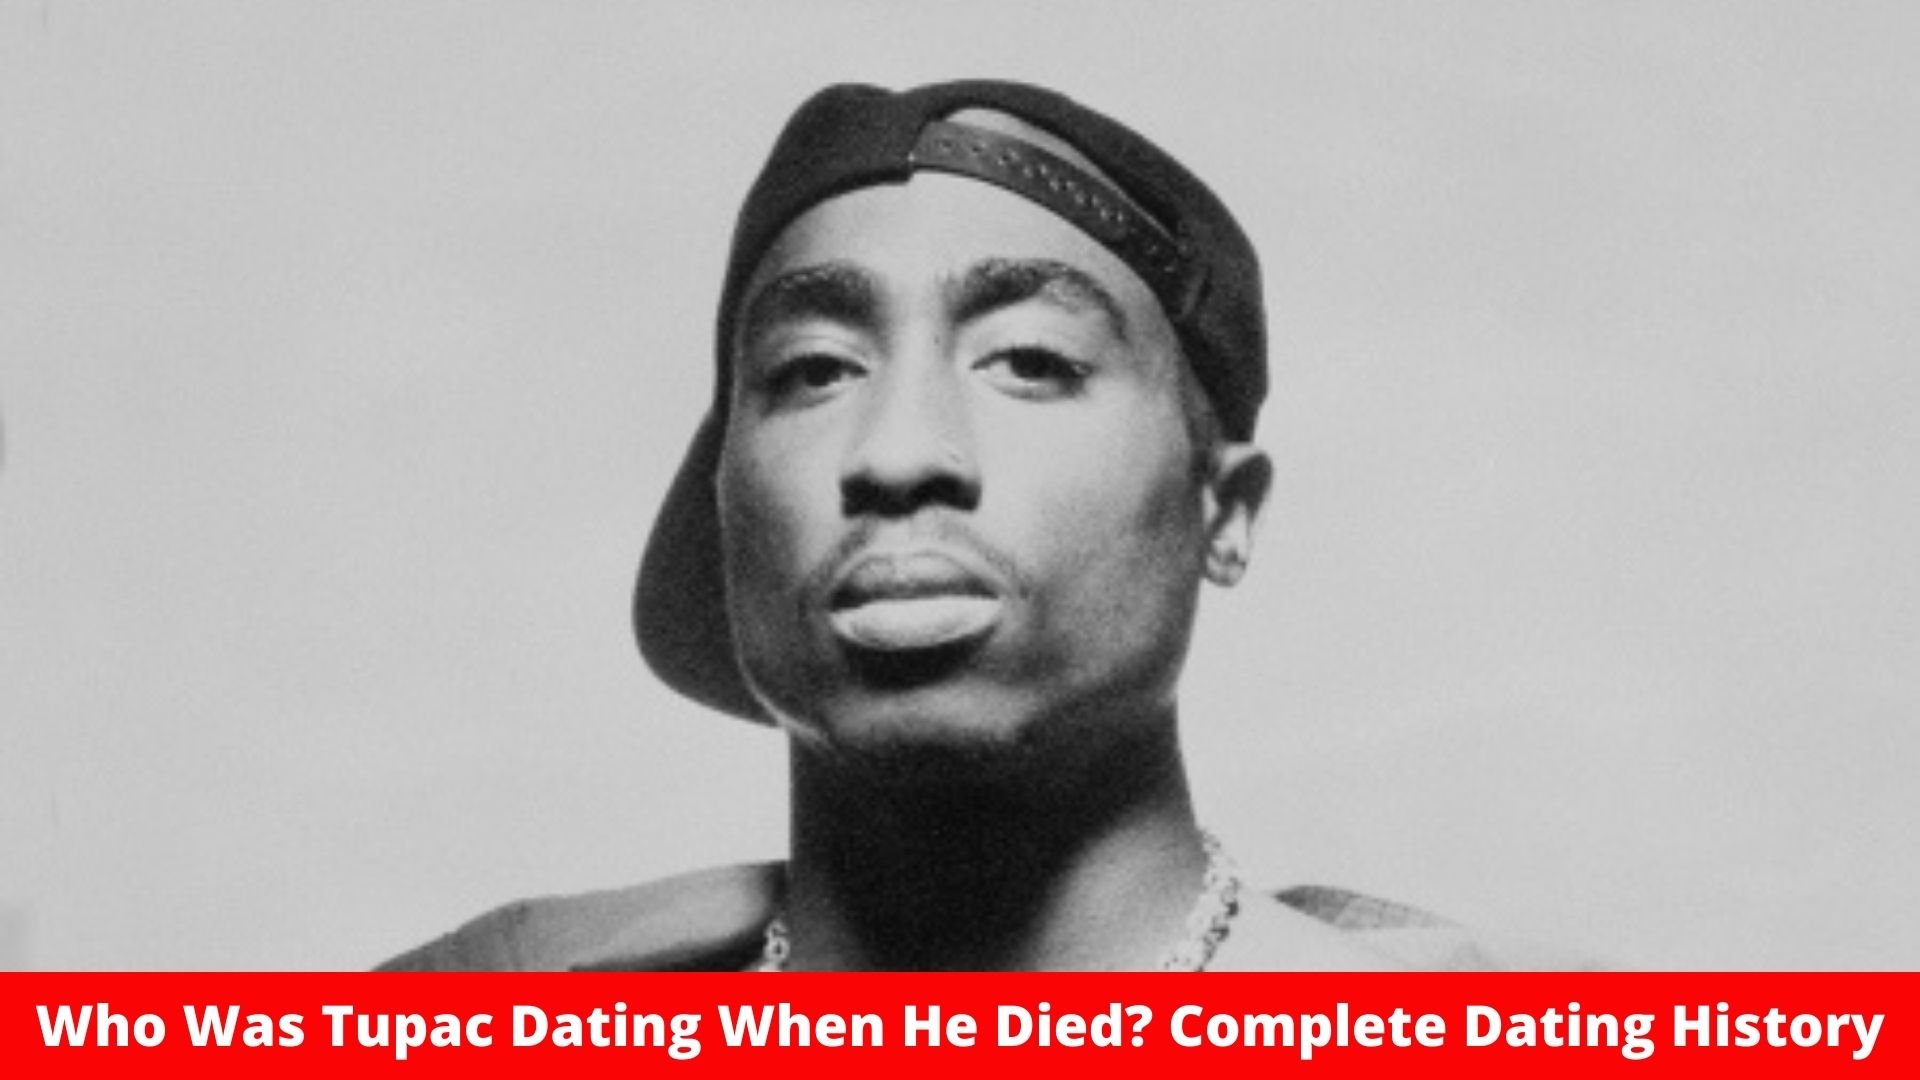 Who Was Tupac Dating When He Died? Complete Dating History